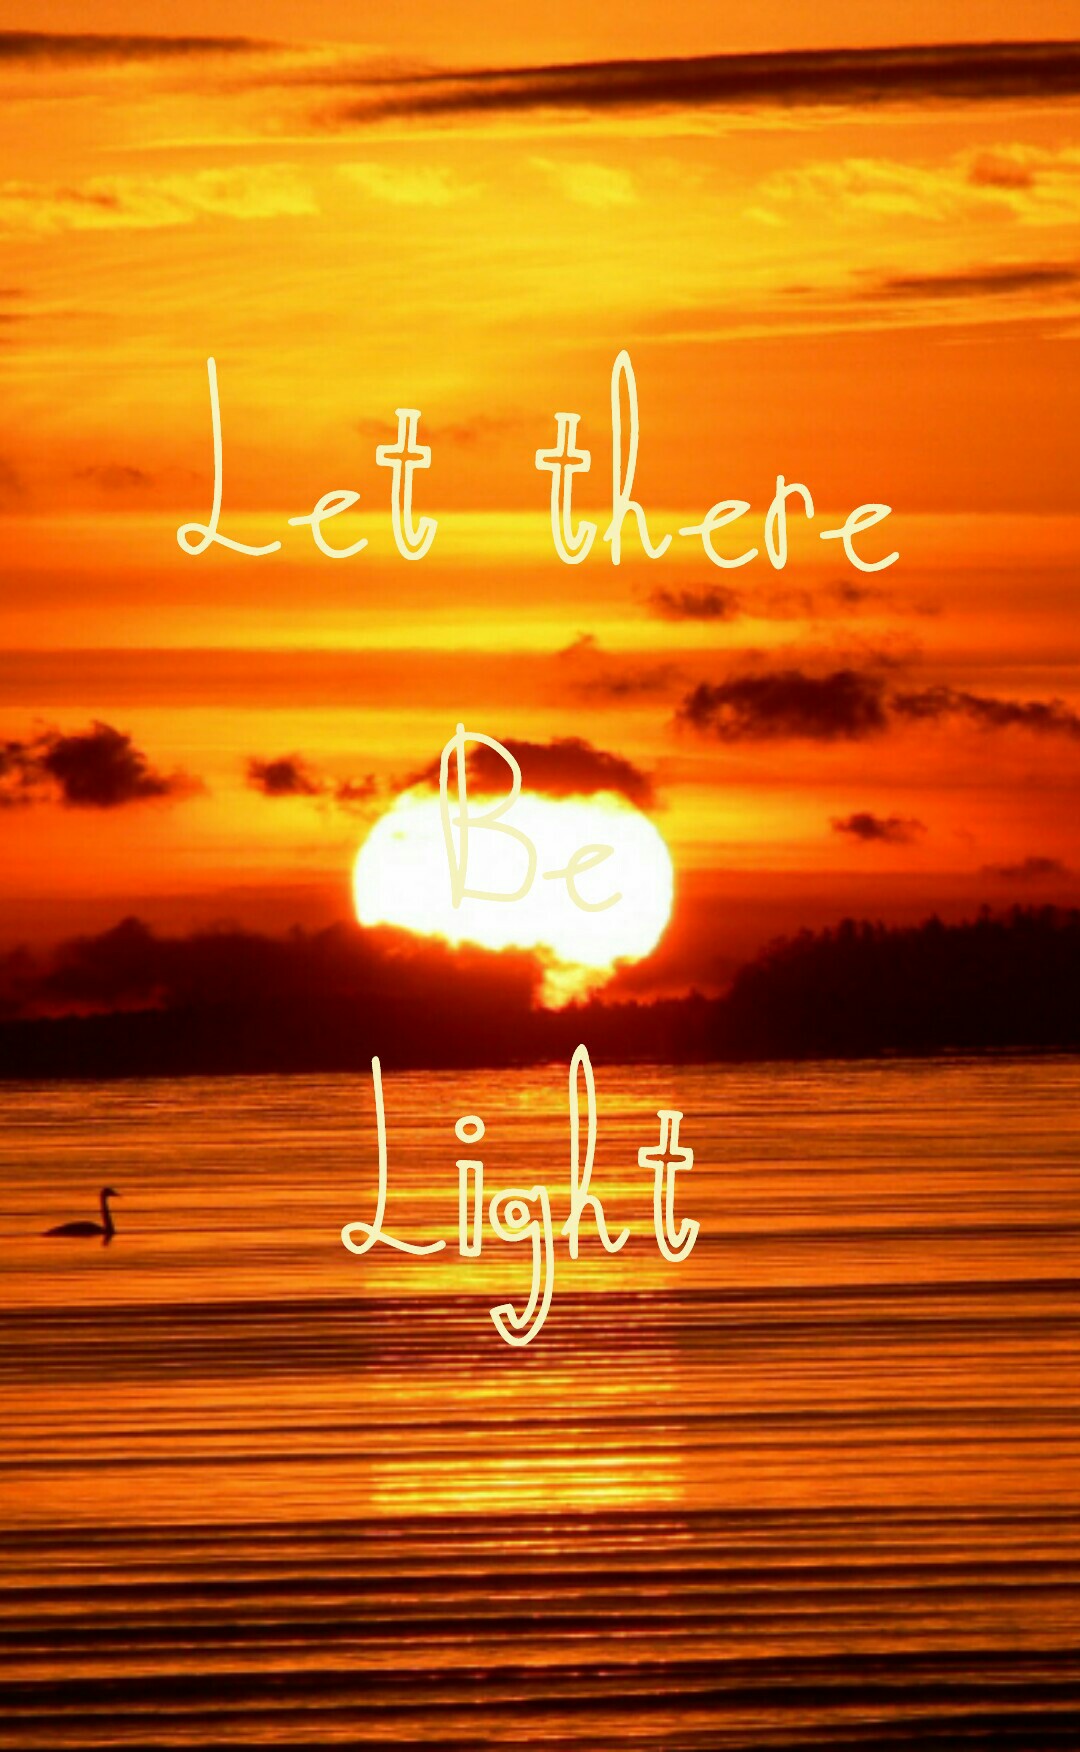 Let there
Be
Light